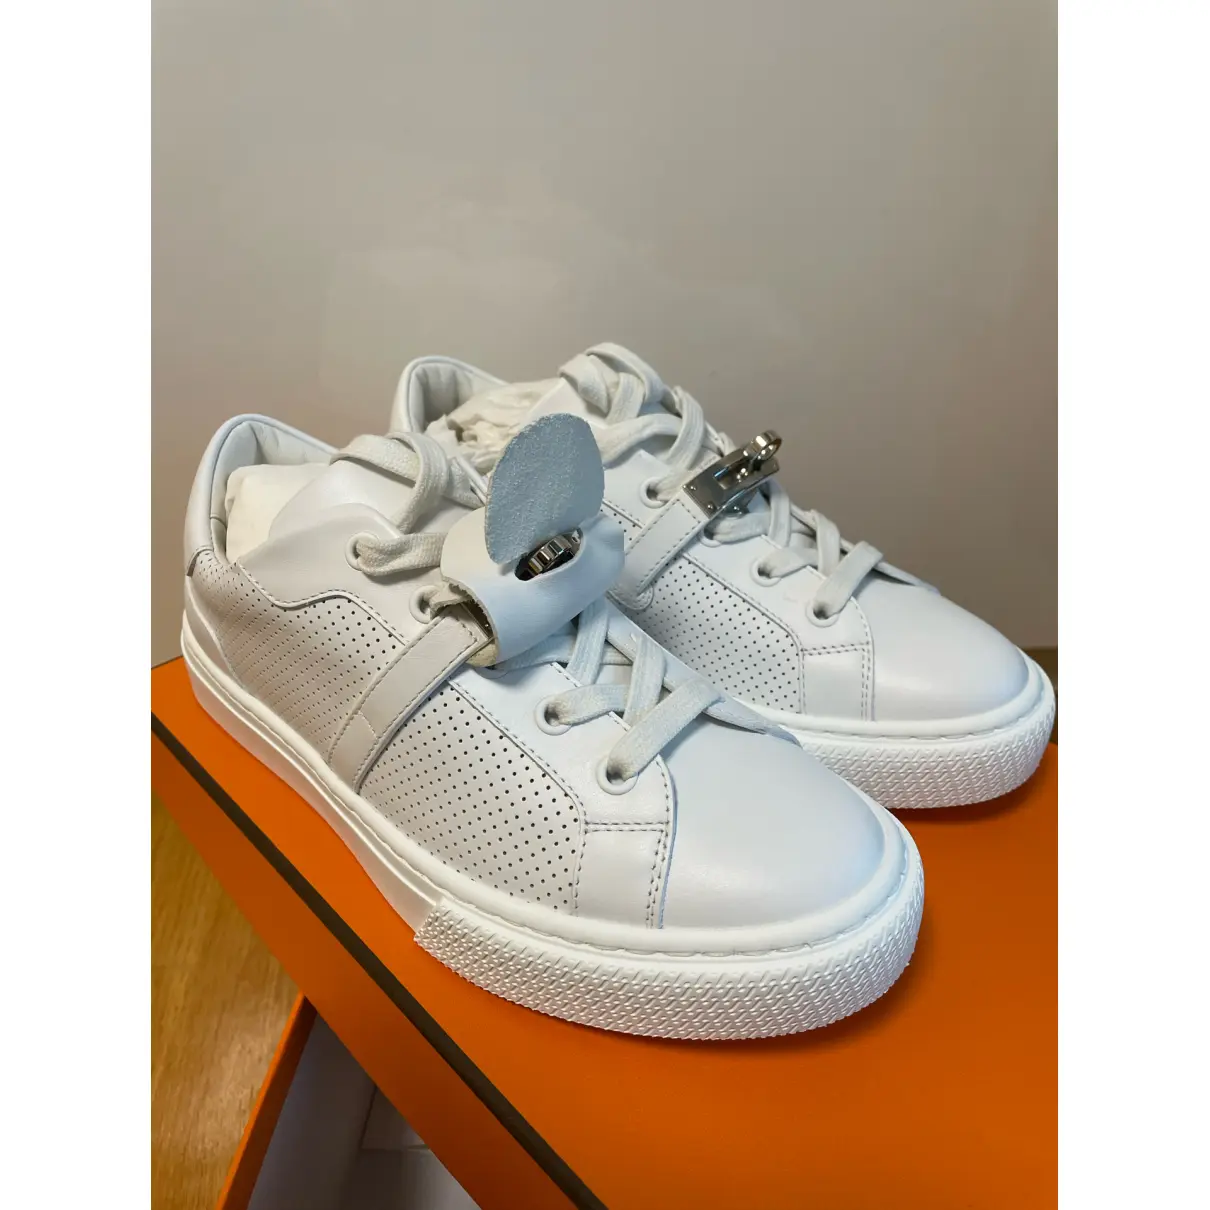 Buy Hermès Day leather trainers online